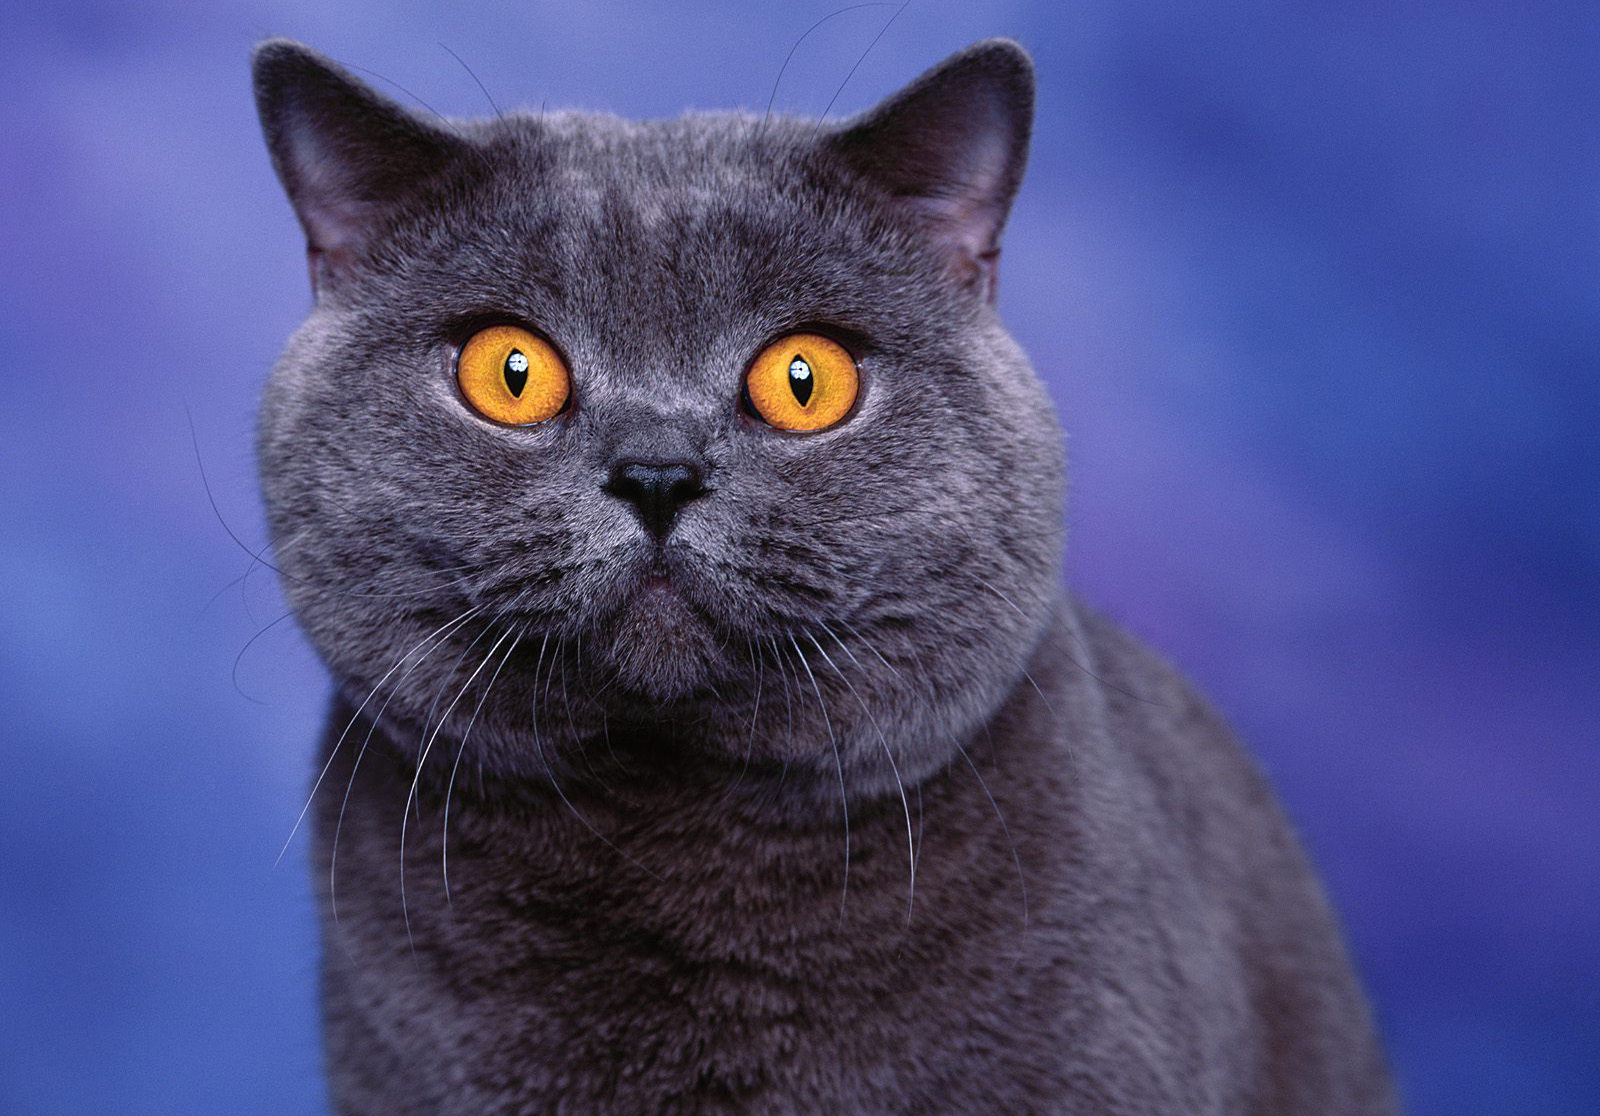 Wallpaper, Asian, fur, kittens, whiskers, Russian Blue, Black Cat, British shorthair, eye, close up, cat like mammal, snout, small to medium sized cats, carnivoran, domestic short haired cat, chartreux, korat, bombay